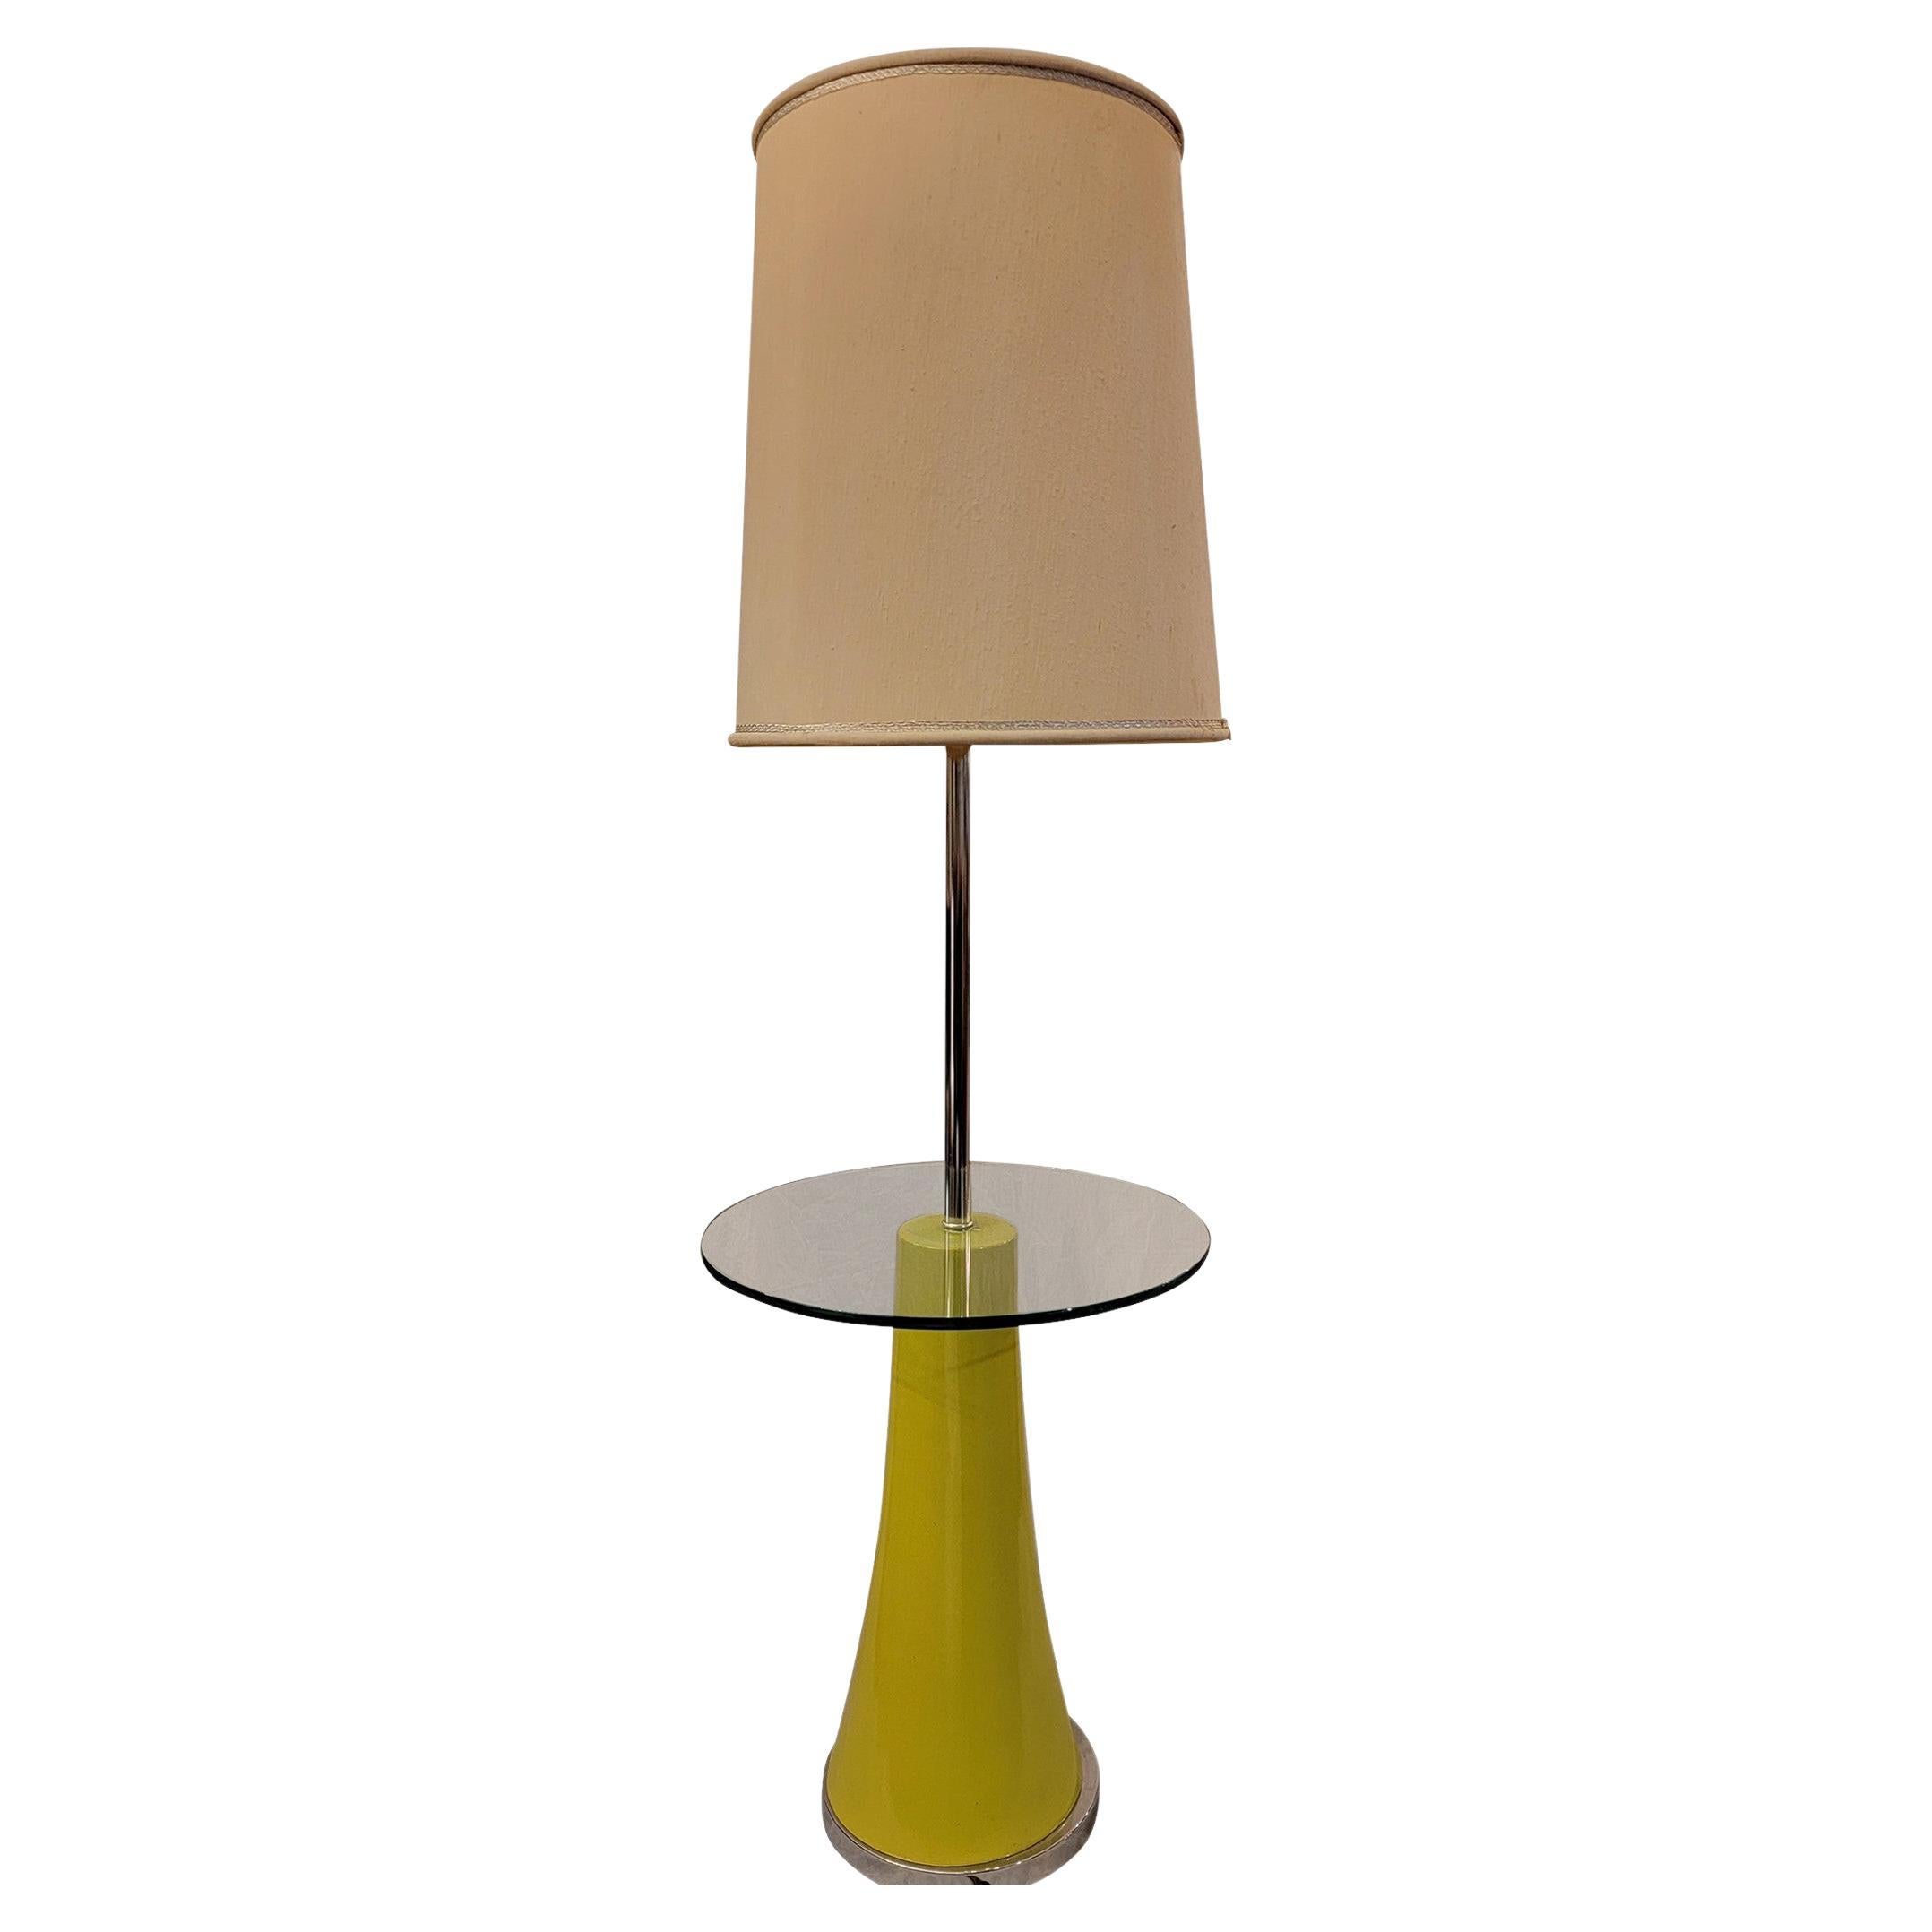 1980s Midcentury Chrome and Lacquered Floor Lamp with Round Glass Center Table